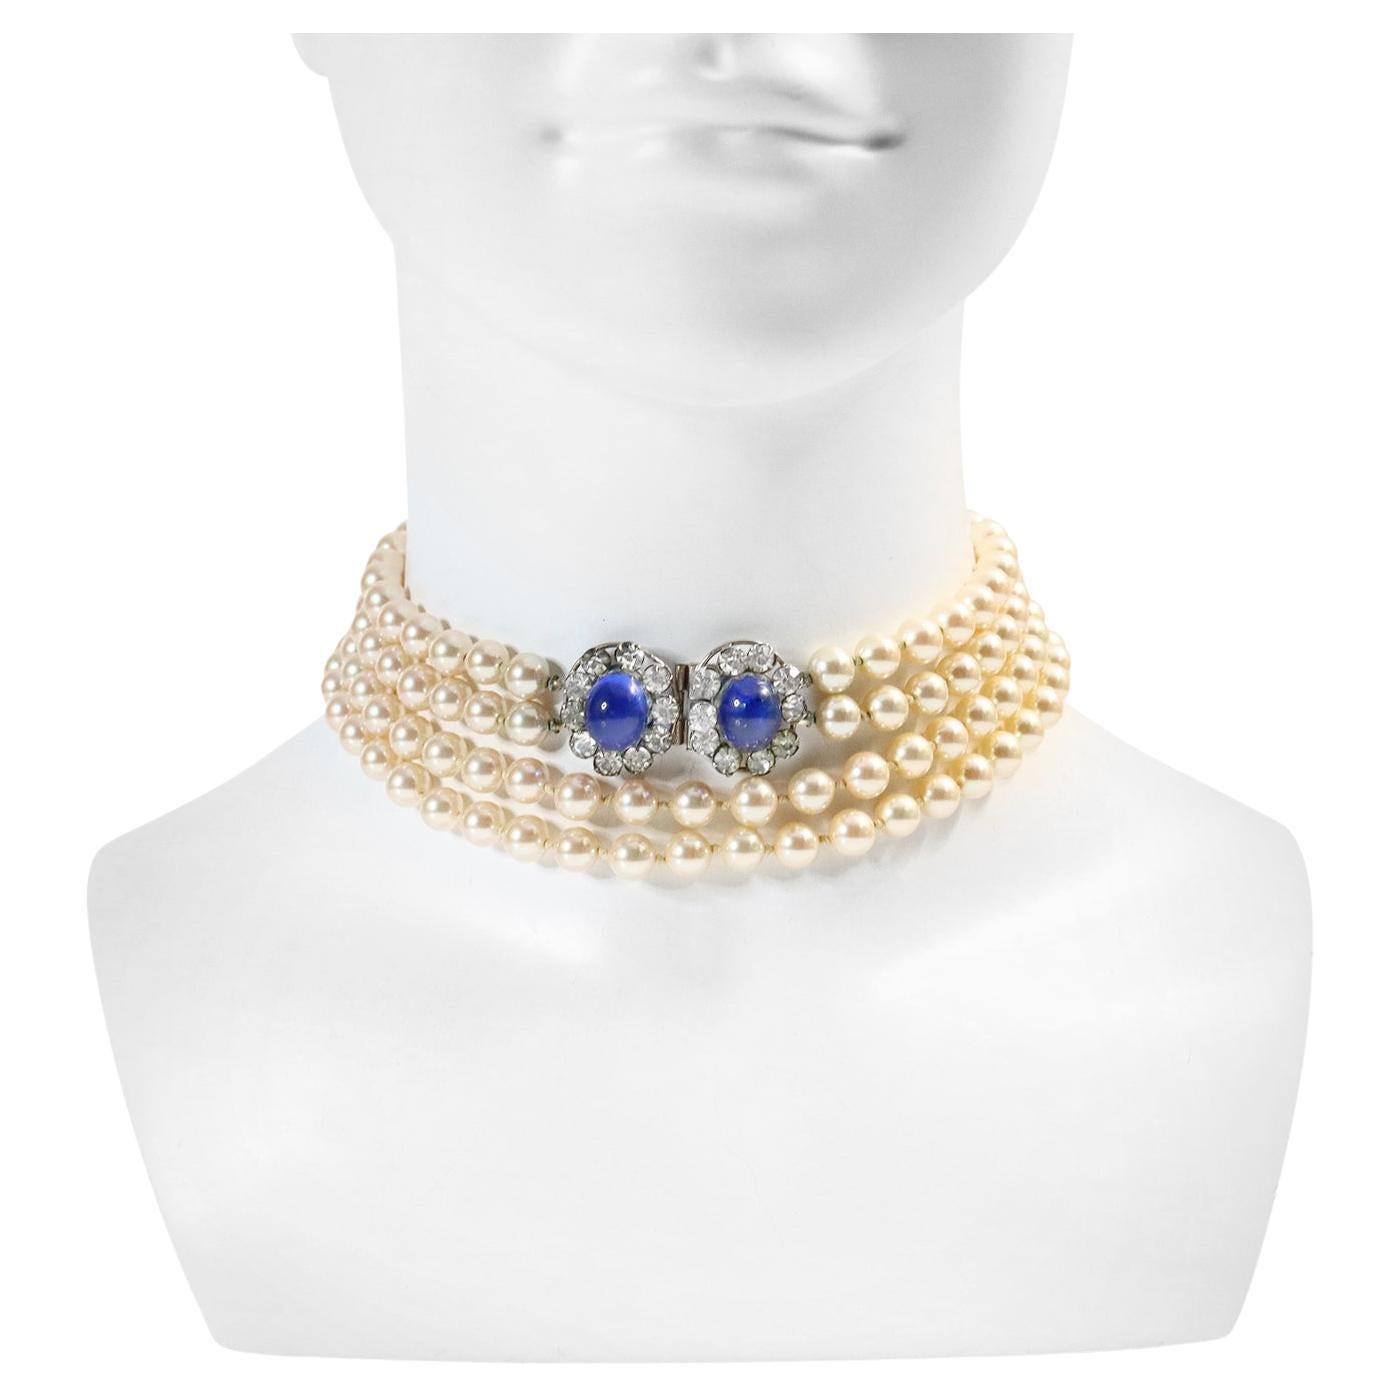 Vintage French Diamante Faux Double Pearl Long Necklace.  Blue cabochons surrounded by crystals make up the two clasps that are then joined by two long rows of faux double knotted heavy faux pearls.  They are 29